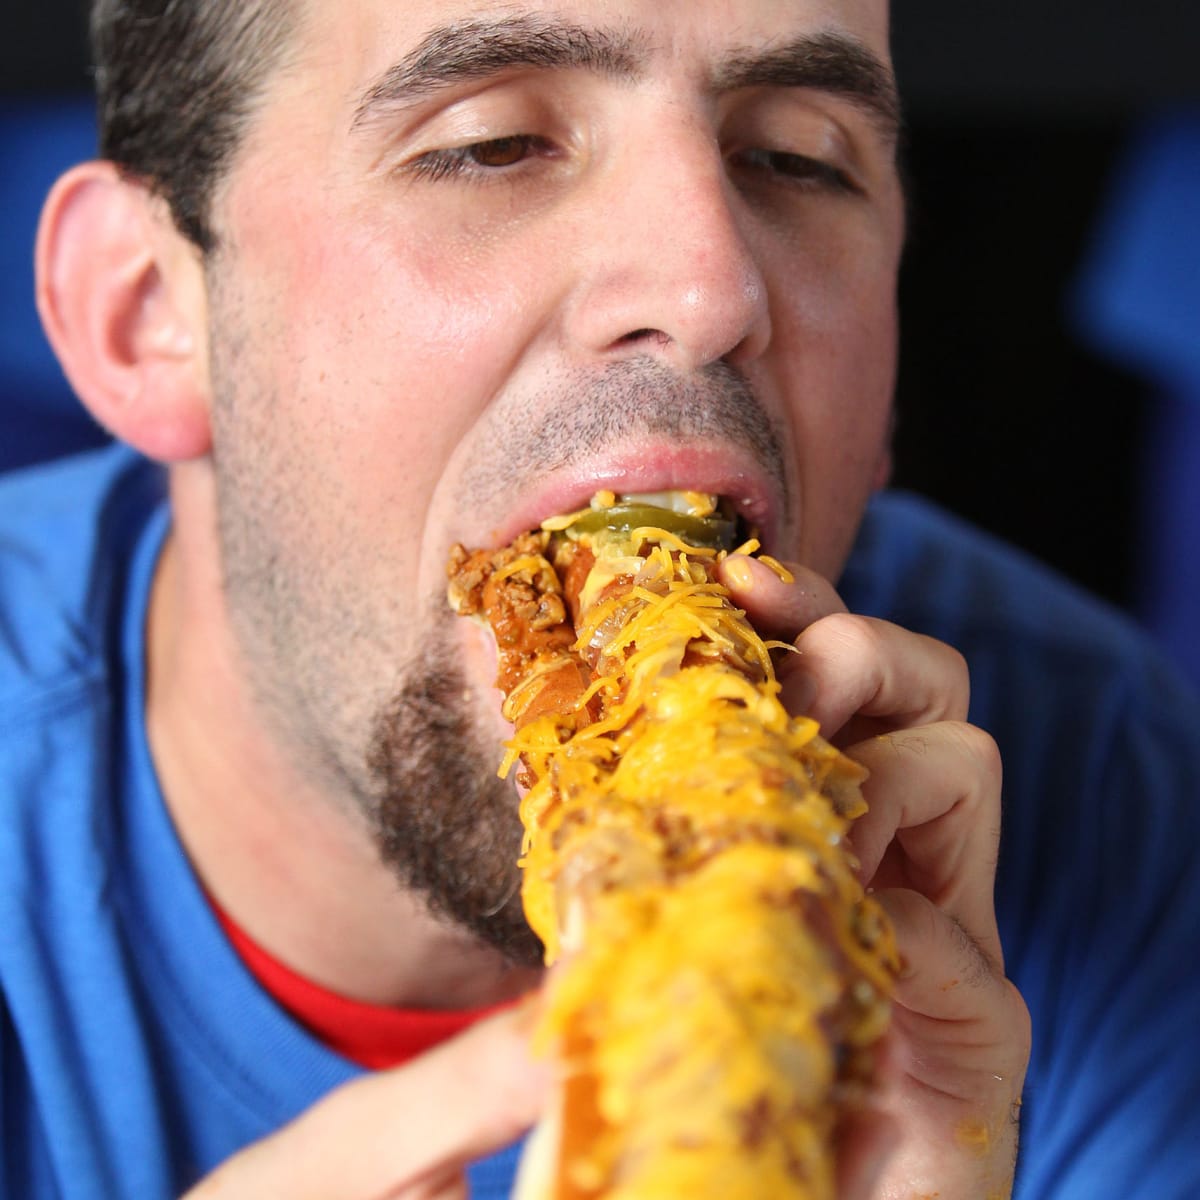 Texas Rangers new concession food: The Boomstick is now a burger